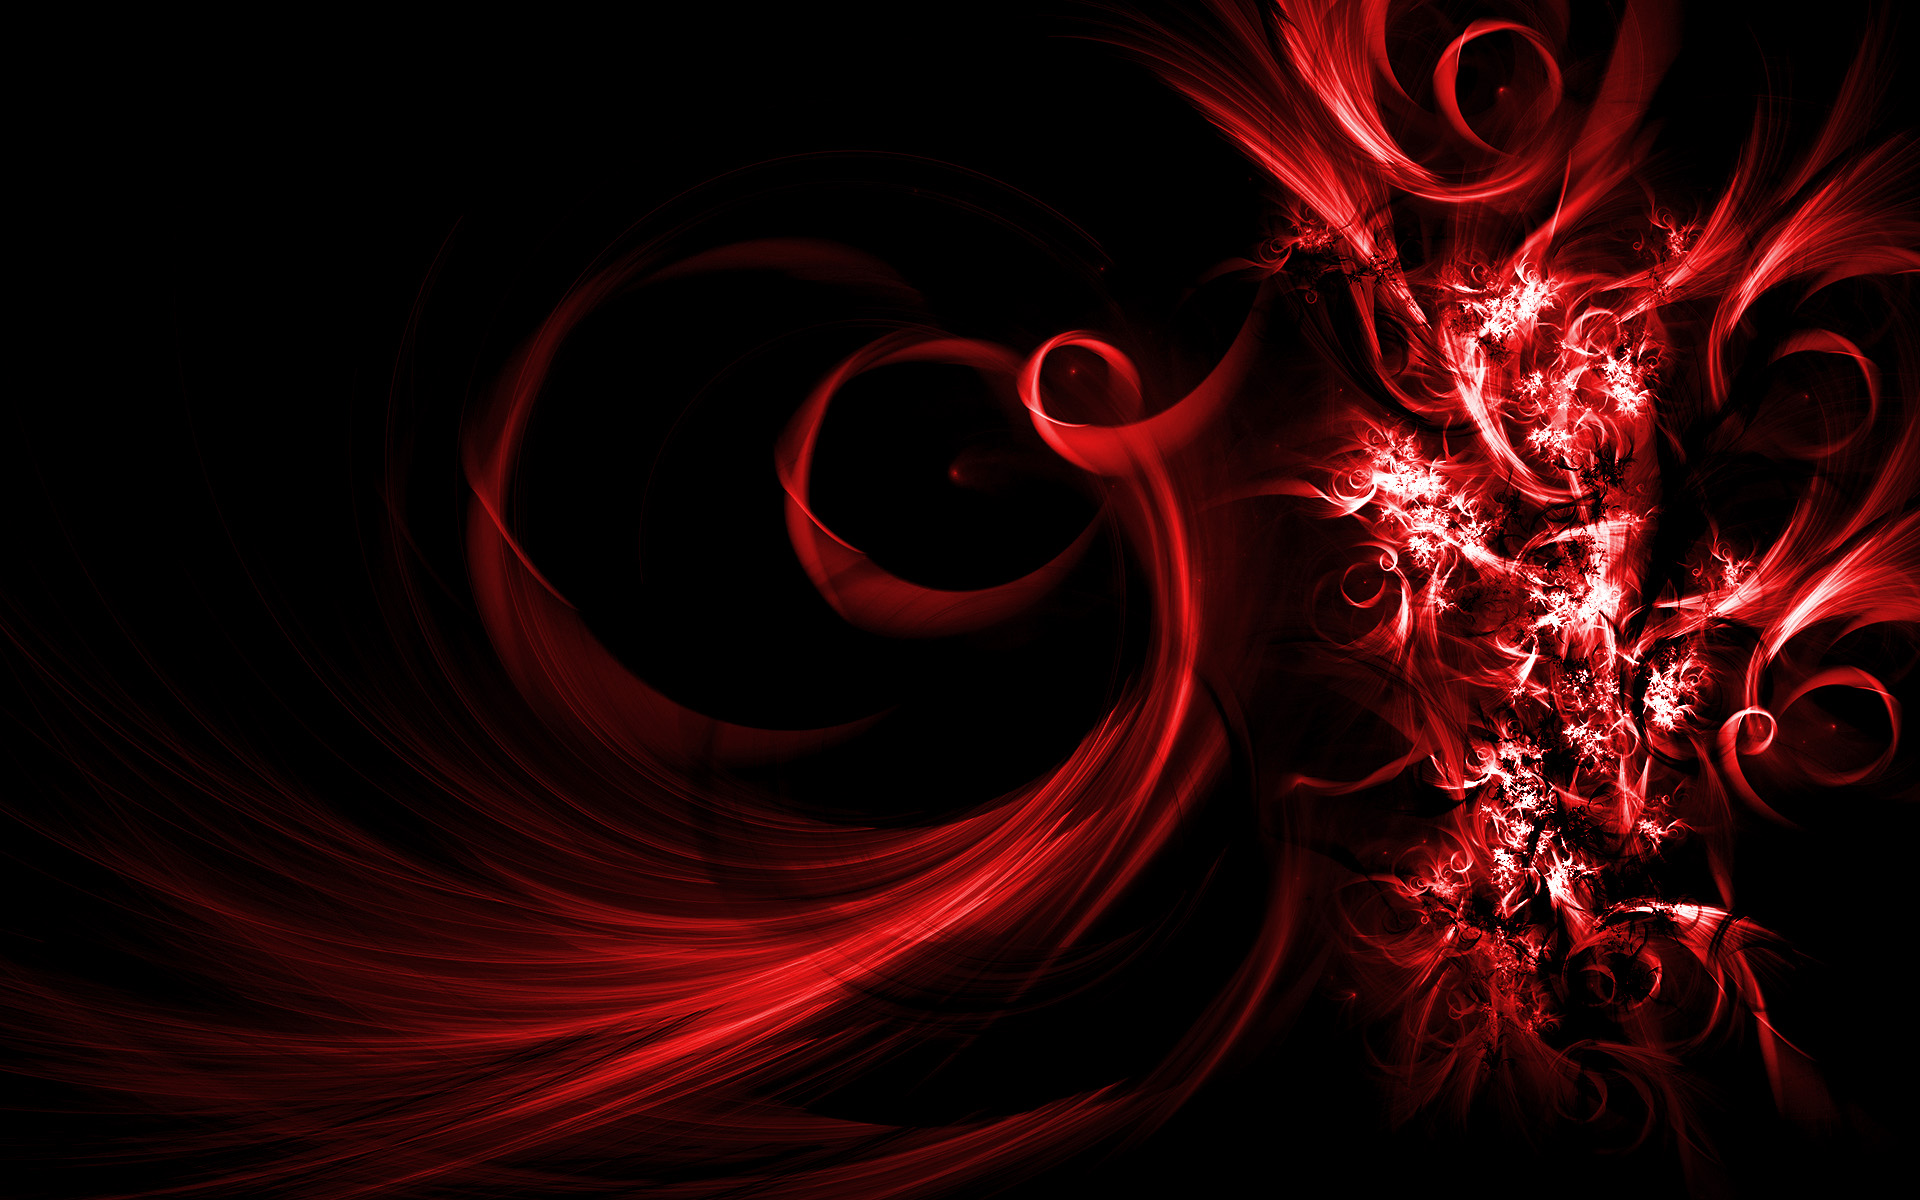 cool abstract wallpaper designs red – Wallpaper